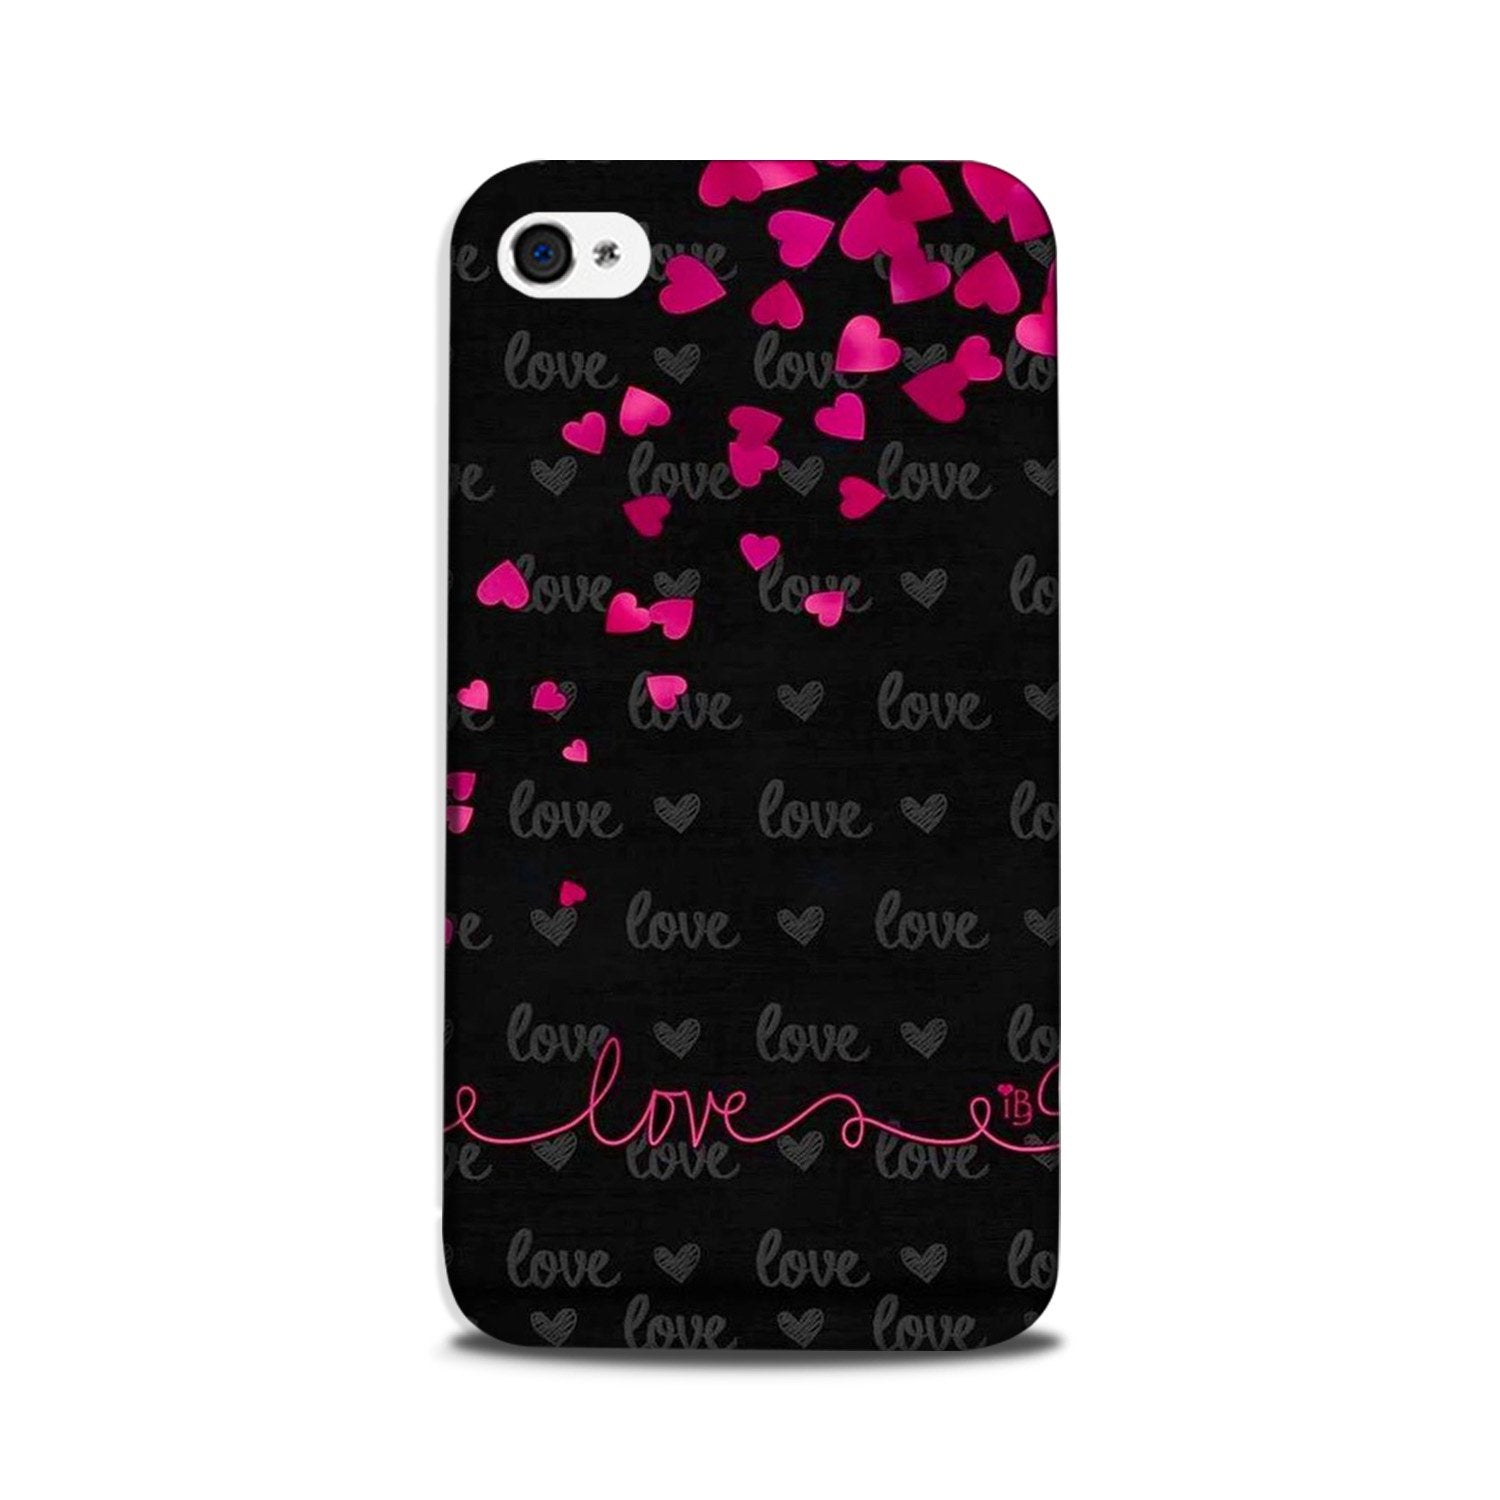 Love in Air Case for iPhone 5/ 5s